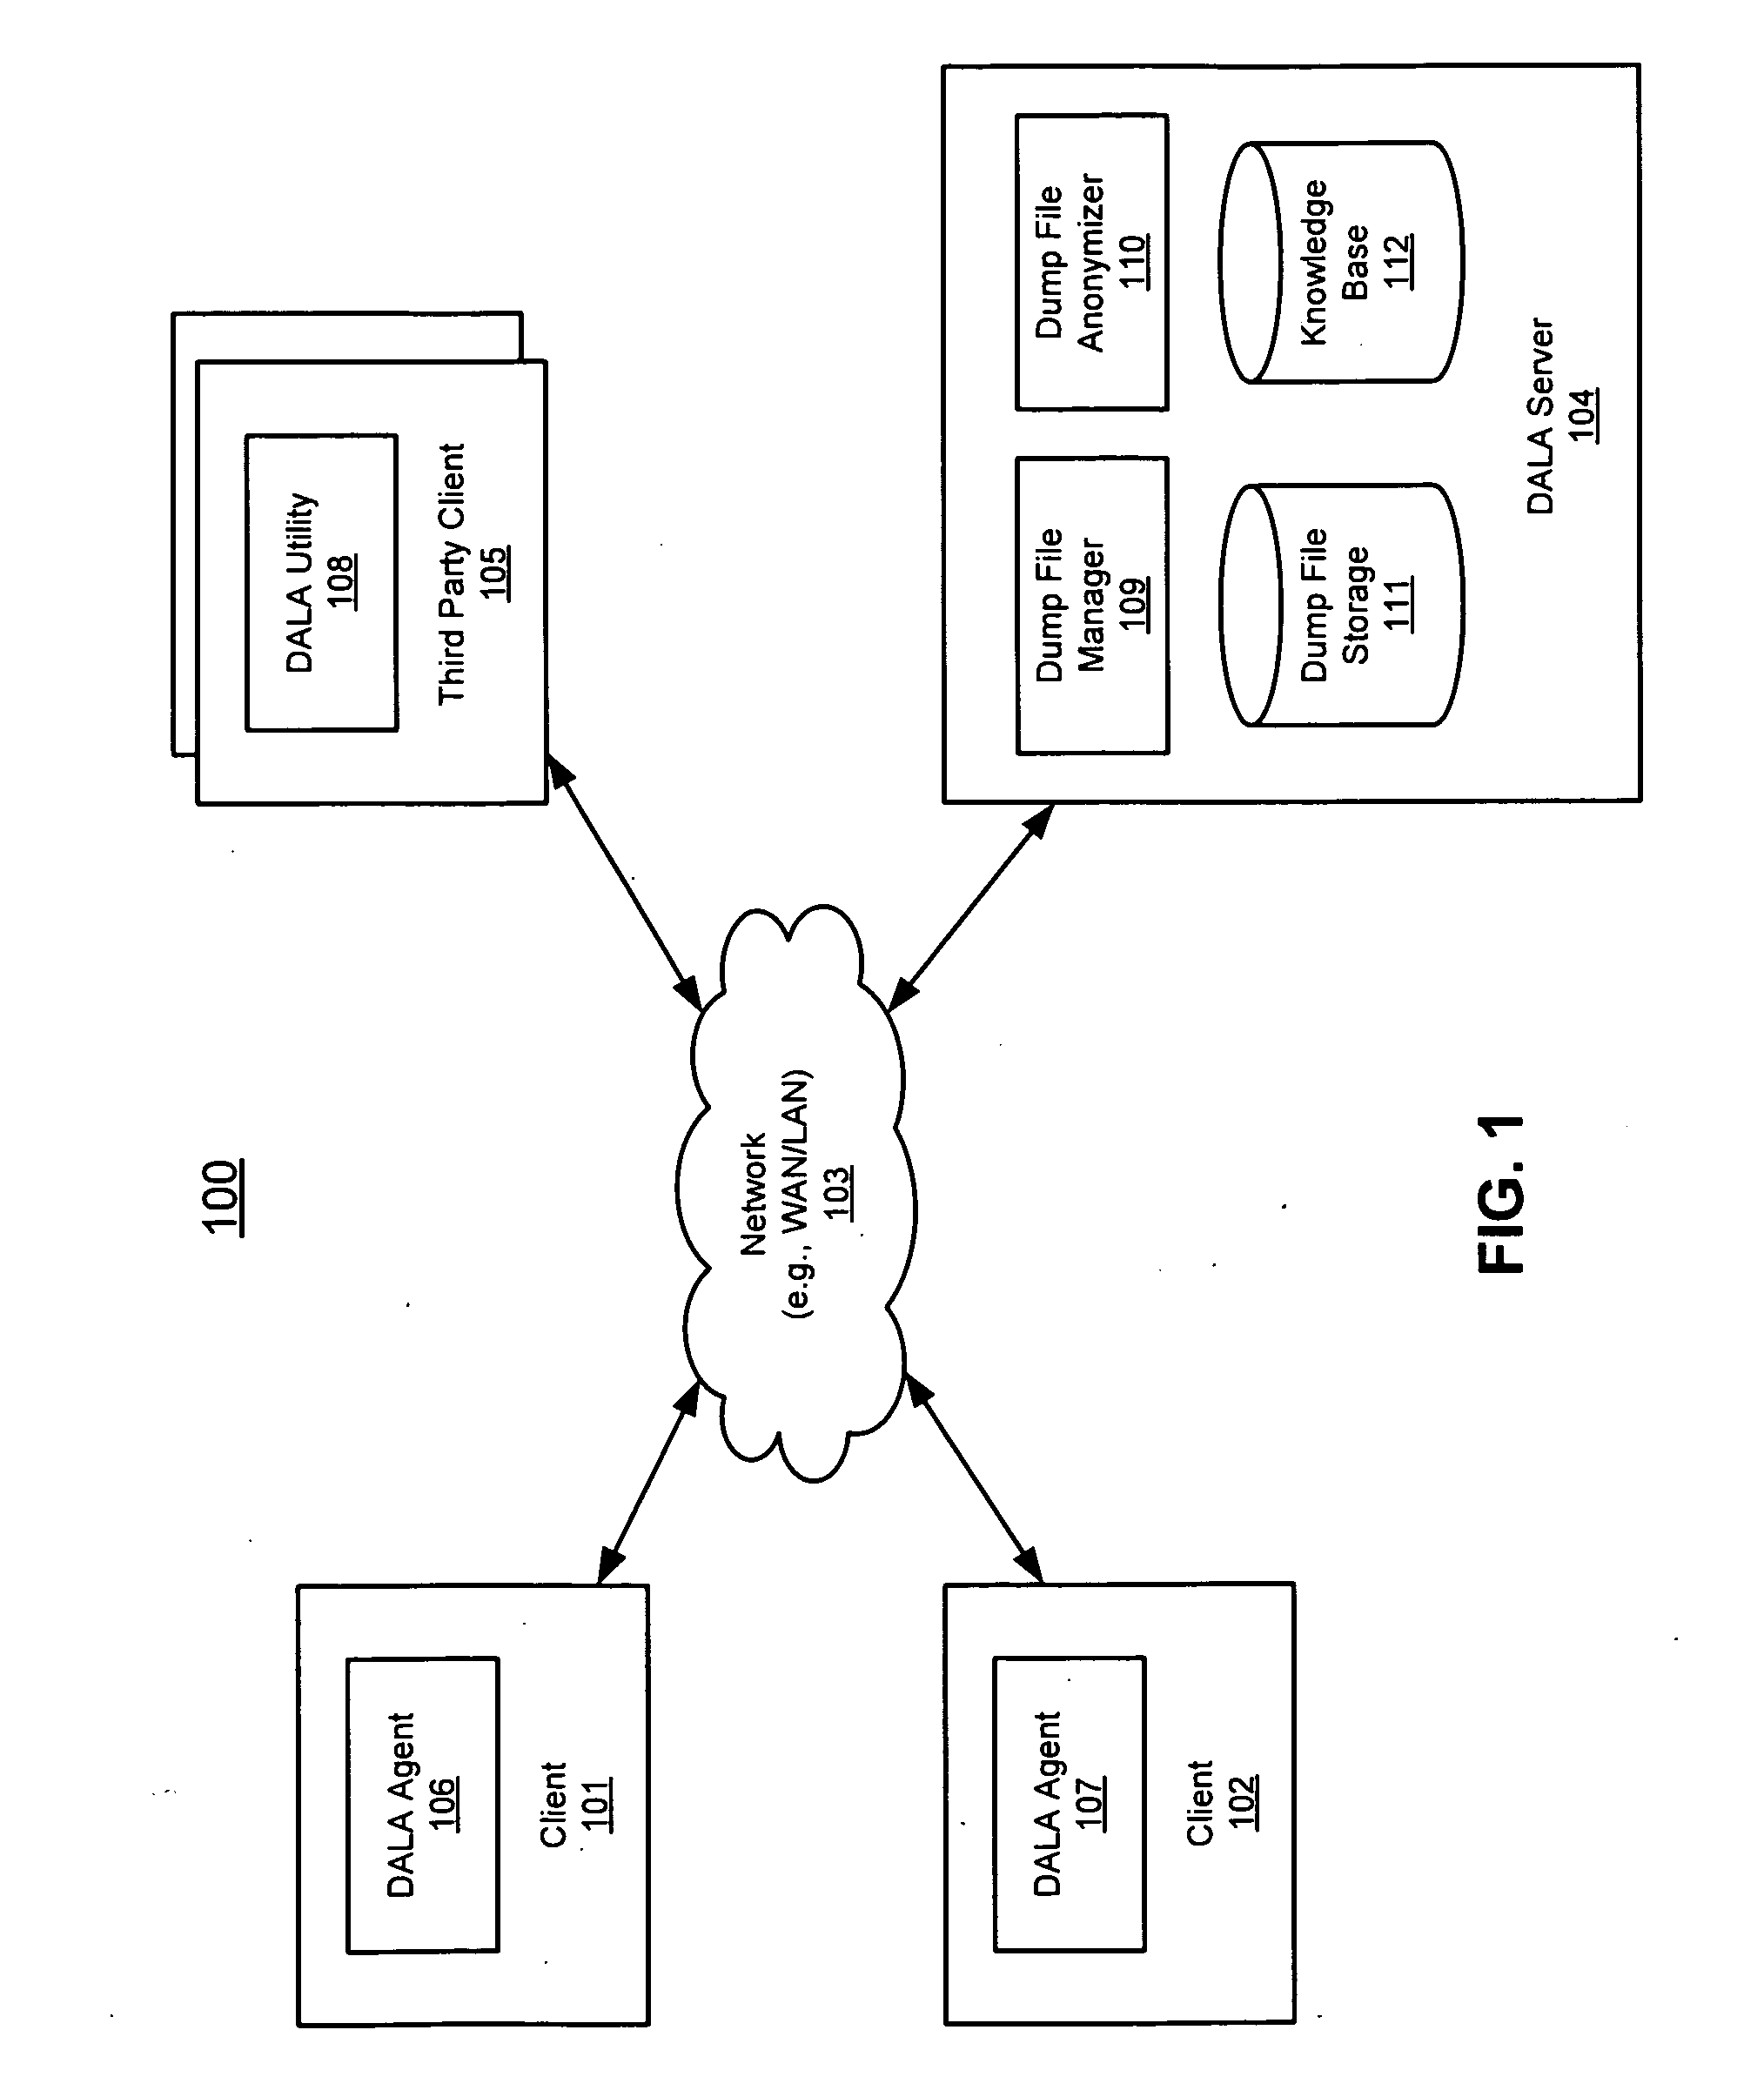 Method and apparatus for dump and log anonymization (DALA)